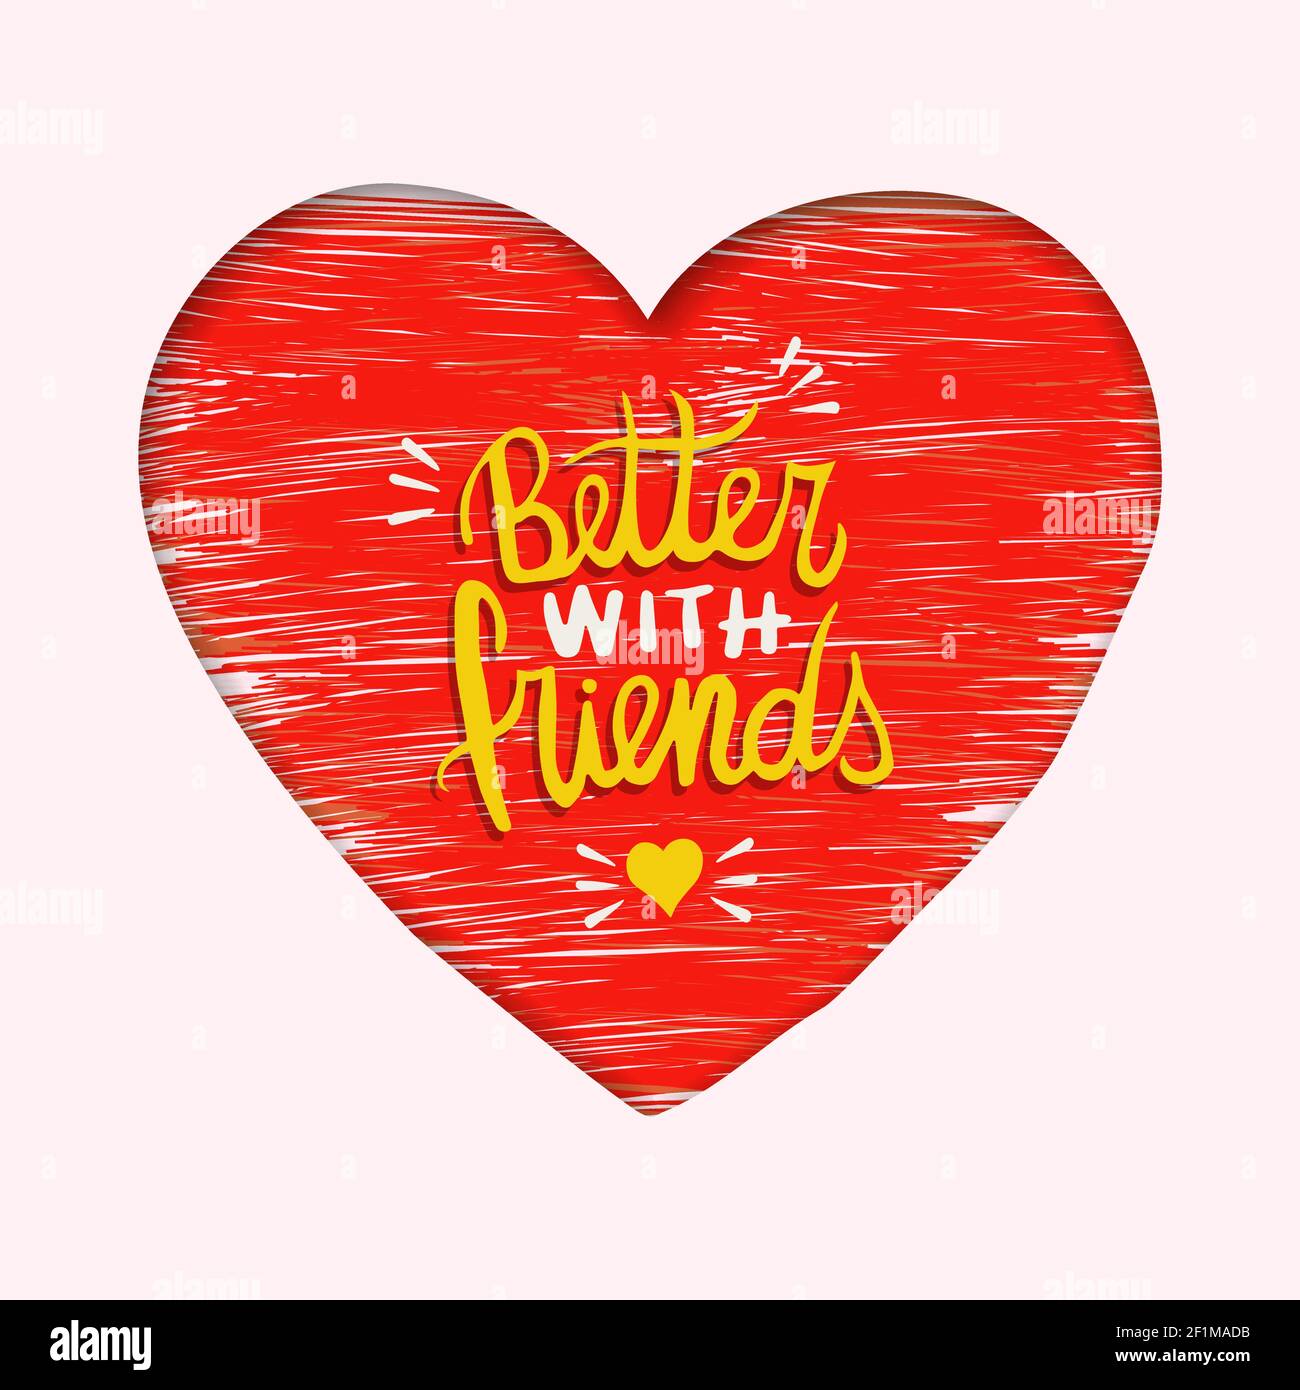 Friendship Day greeting card illustration. Heart shape and better with friends text quote message for social event celebration. Stock Vector